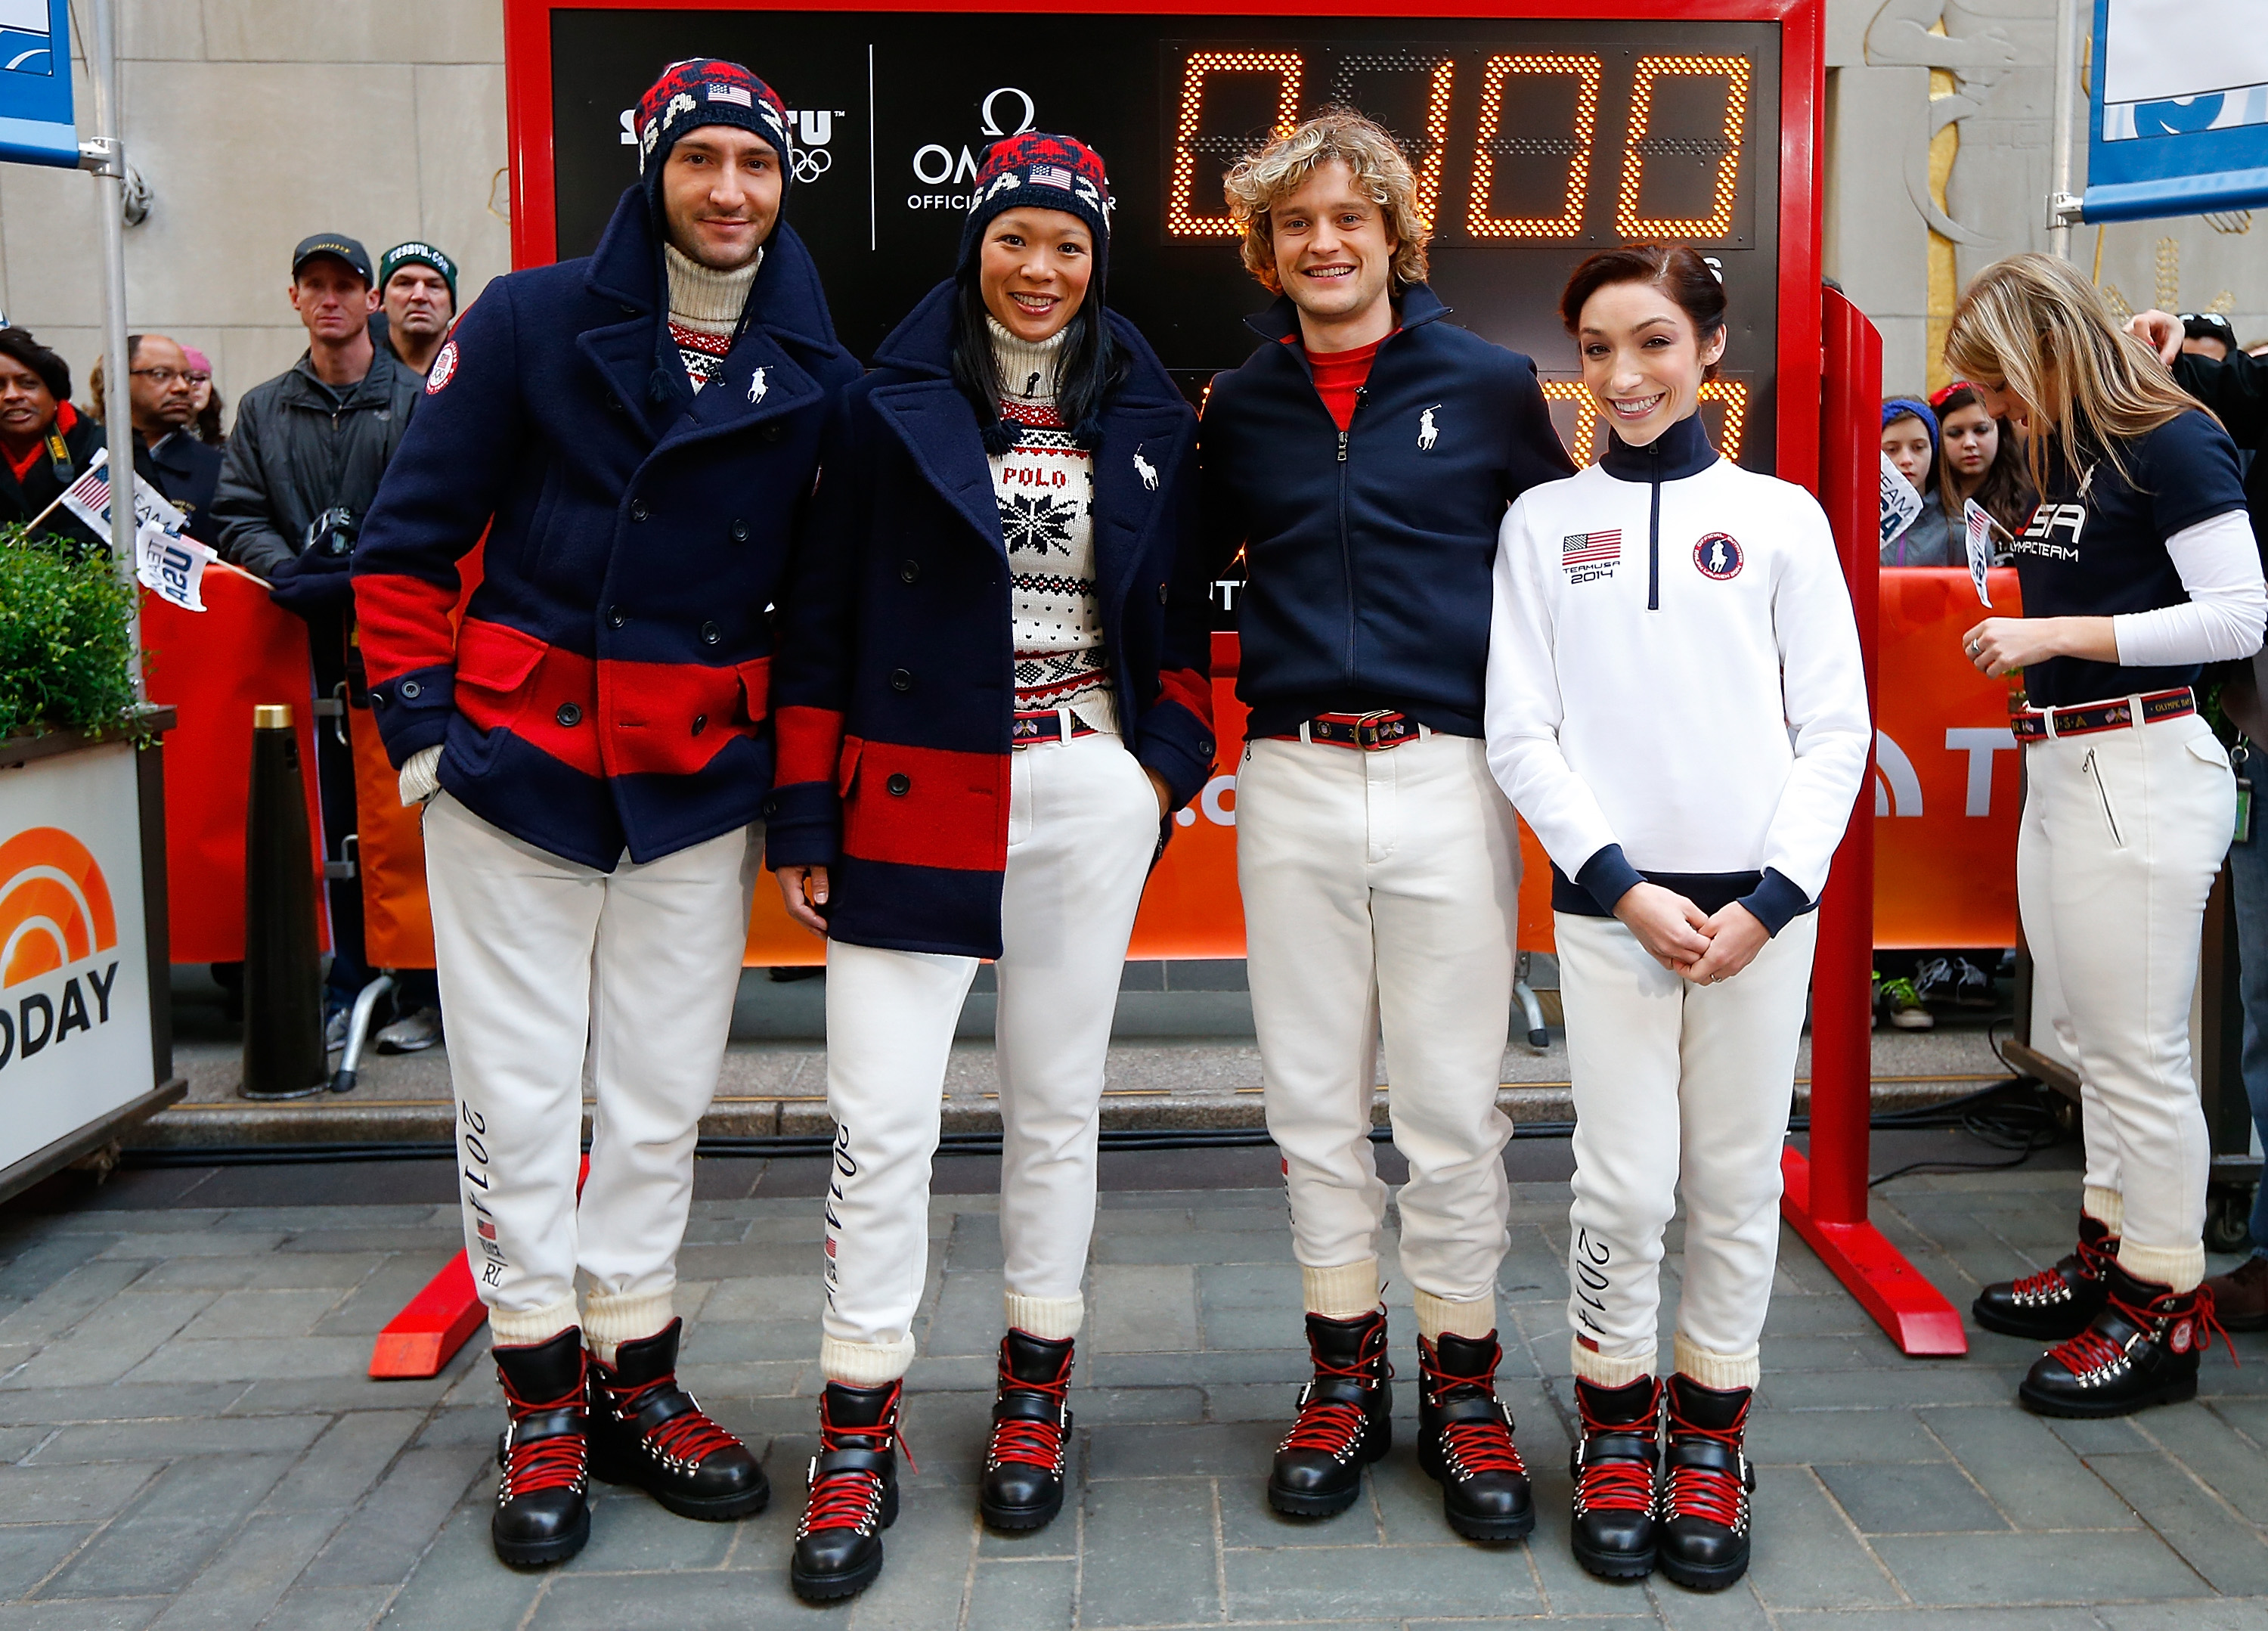 (L-R)Figure Skating Oympic Athlete Evan Lysacek, Ice Hockey Oympic Athlete Julie Chu, Ice Dancers Oympic Athlete Meryl Davis and Charlie White model the Olympic closing ceremony outfits by Ralph Lauren on Oct. 29, 2013 in New York City.